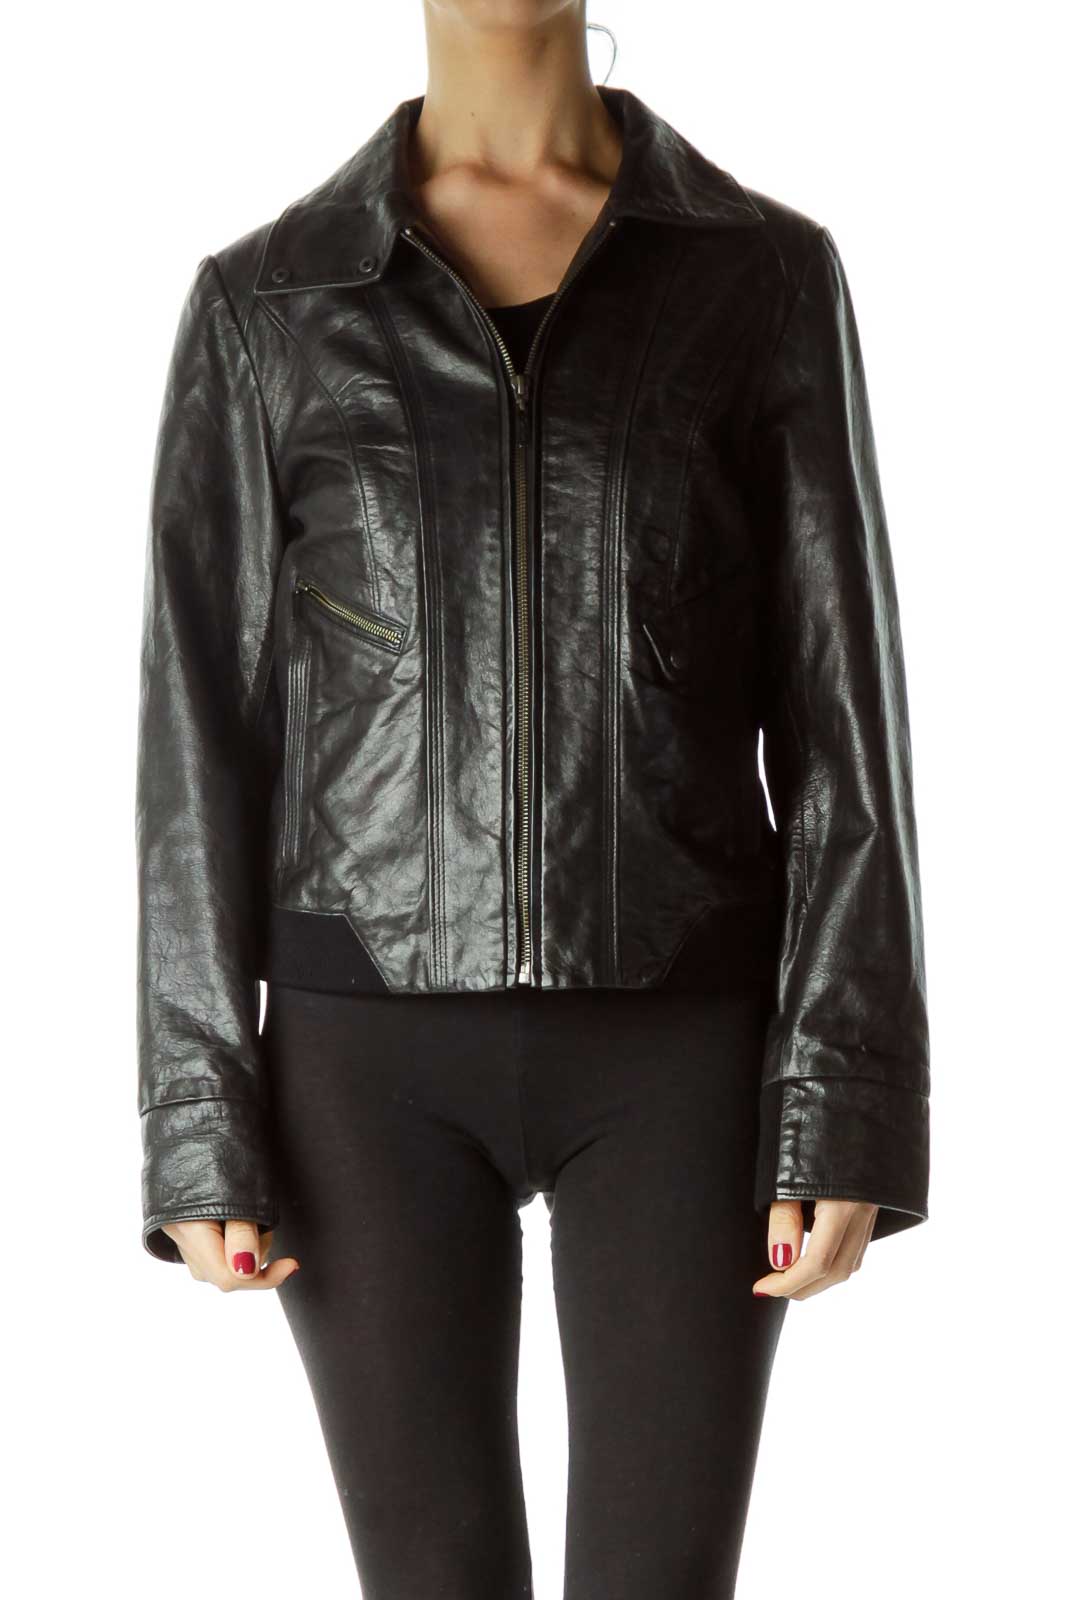 Black Zippered Leather Jacket with Pockets Front